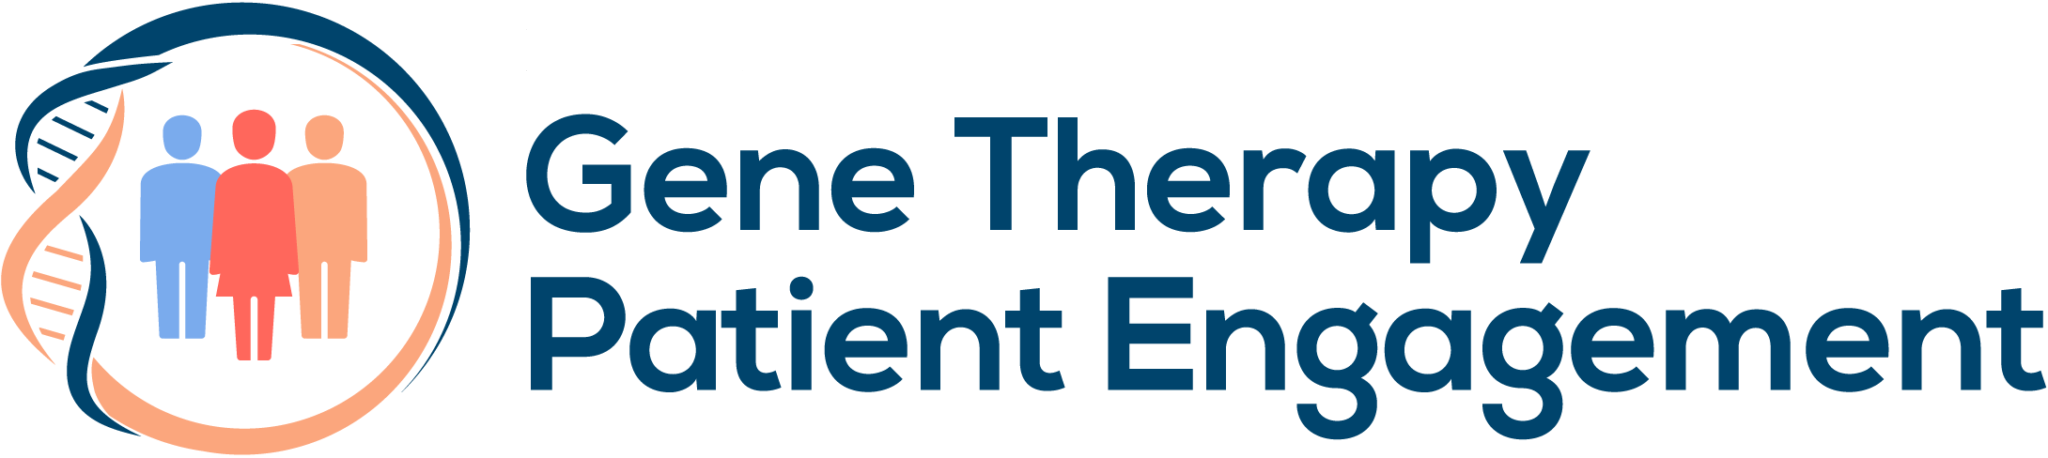 NEW Gene_Therapy_for_Patient_Engagement_2022